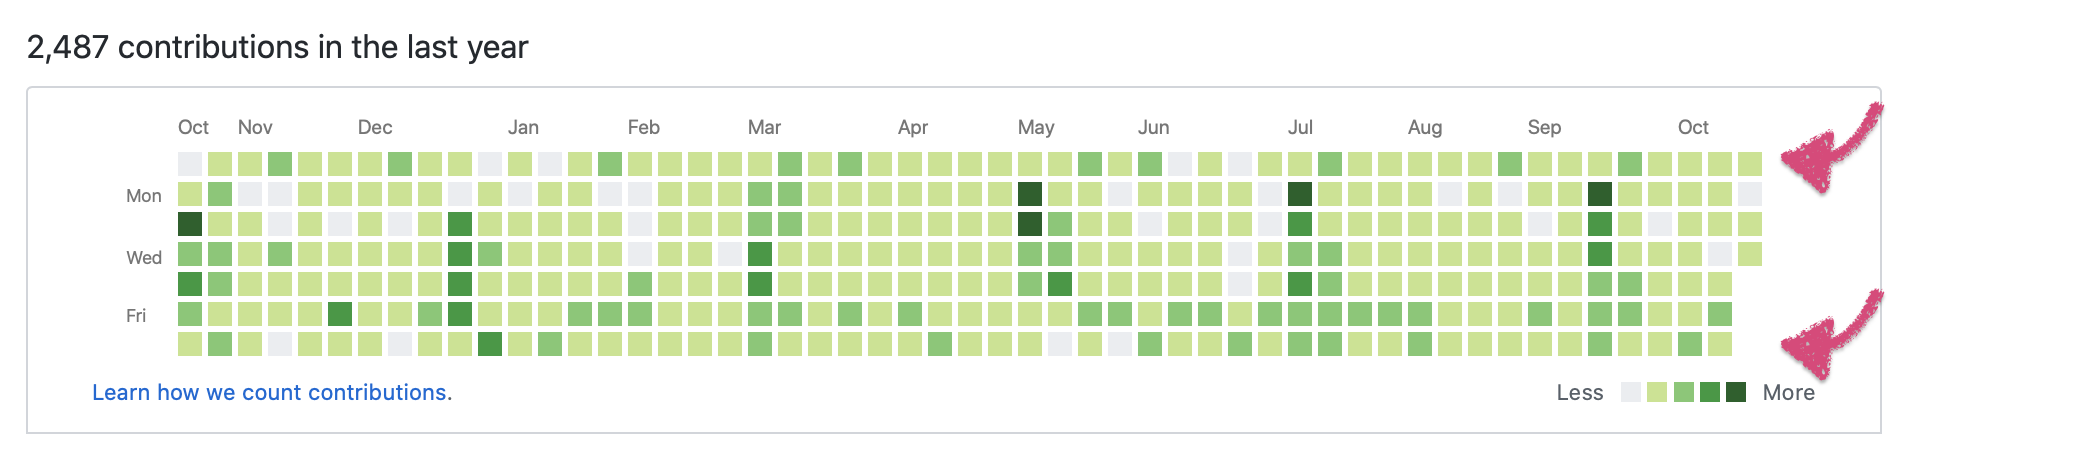 A graphic showing developer commits and highlighting the weekends.